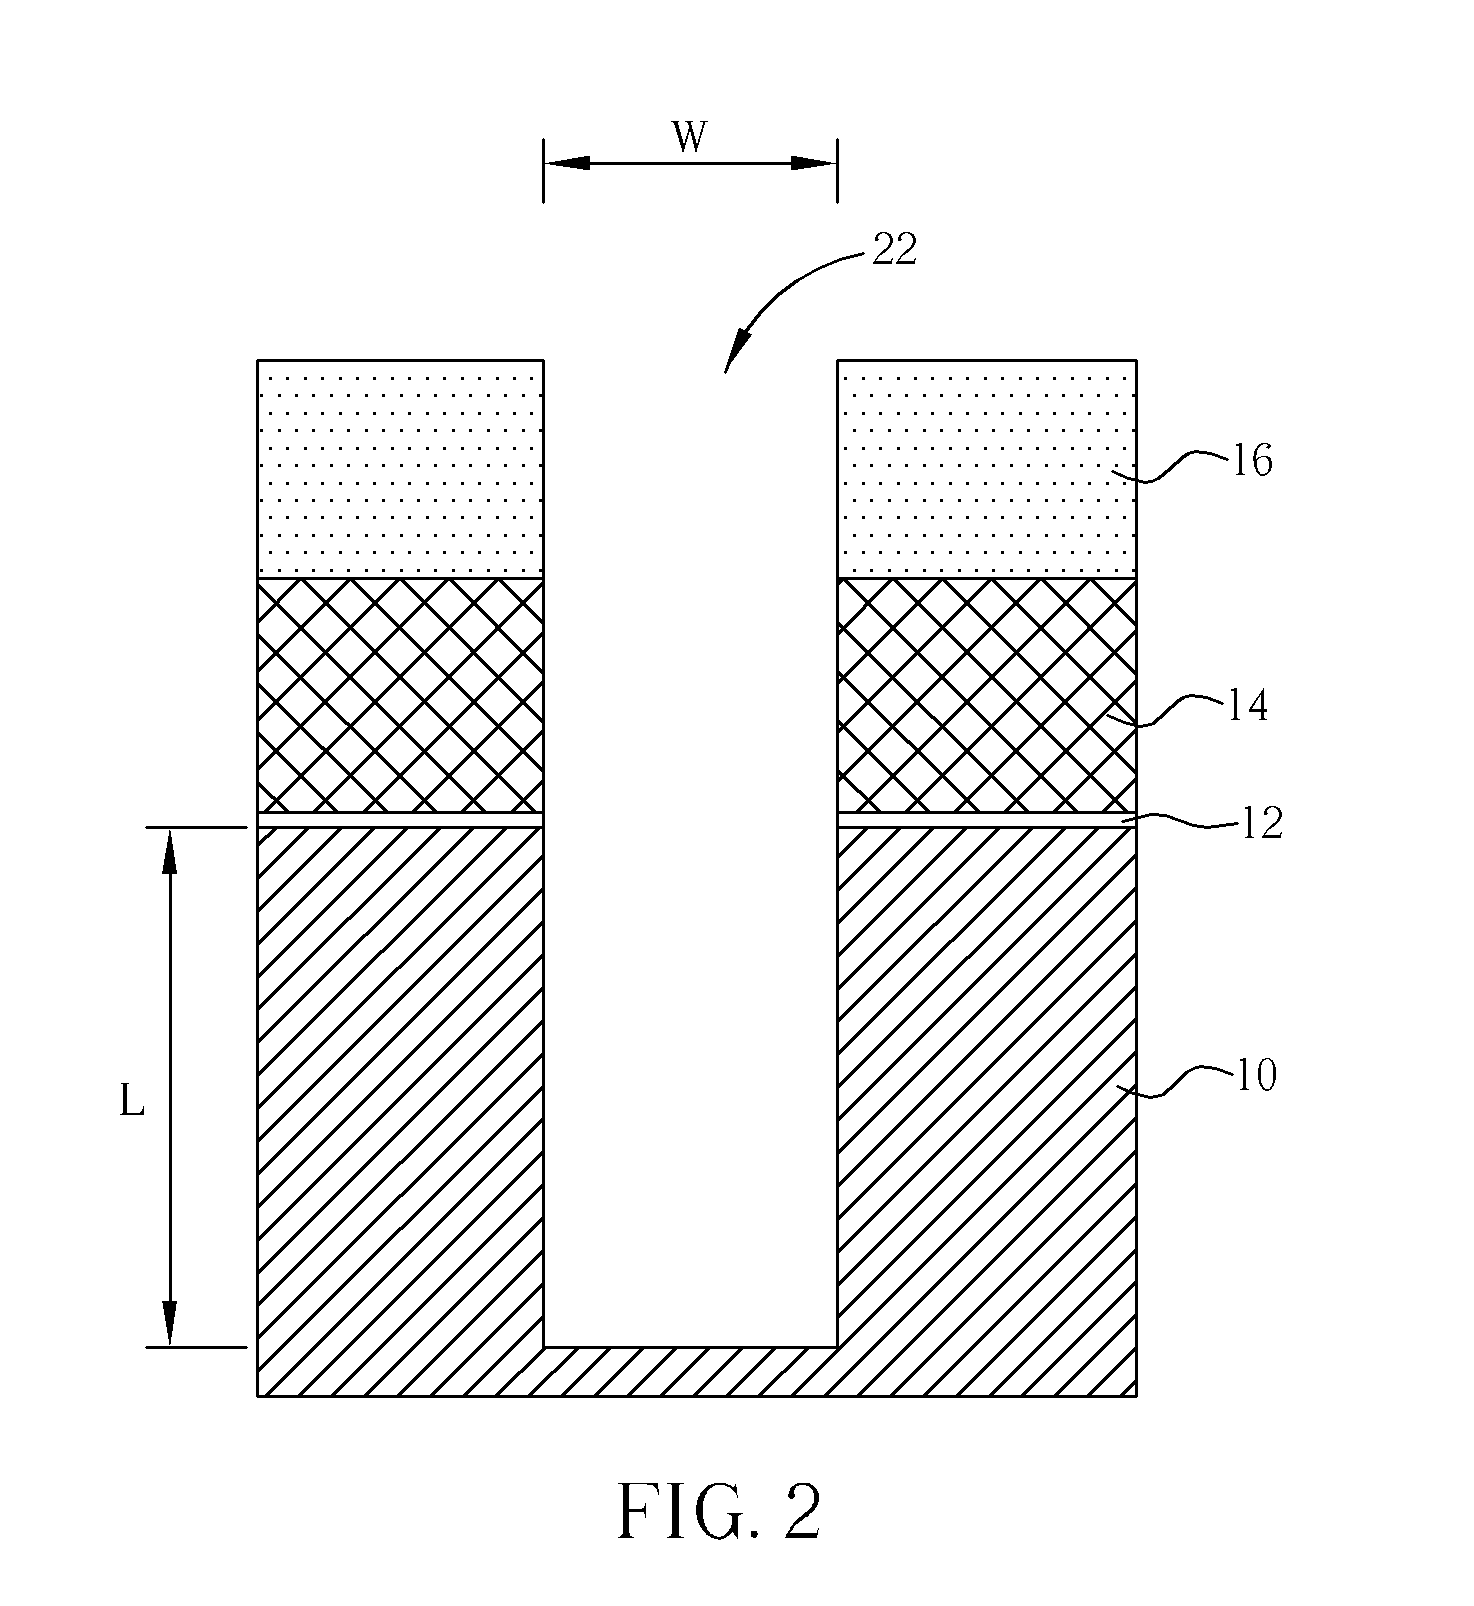 Method of fabricating a trench capacitor having increased capacitance